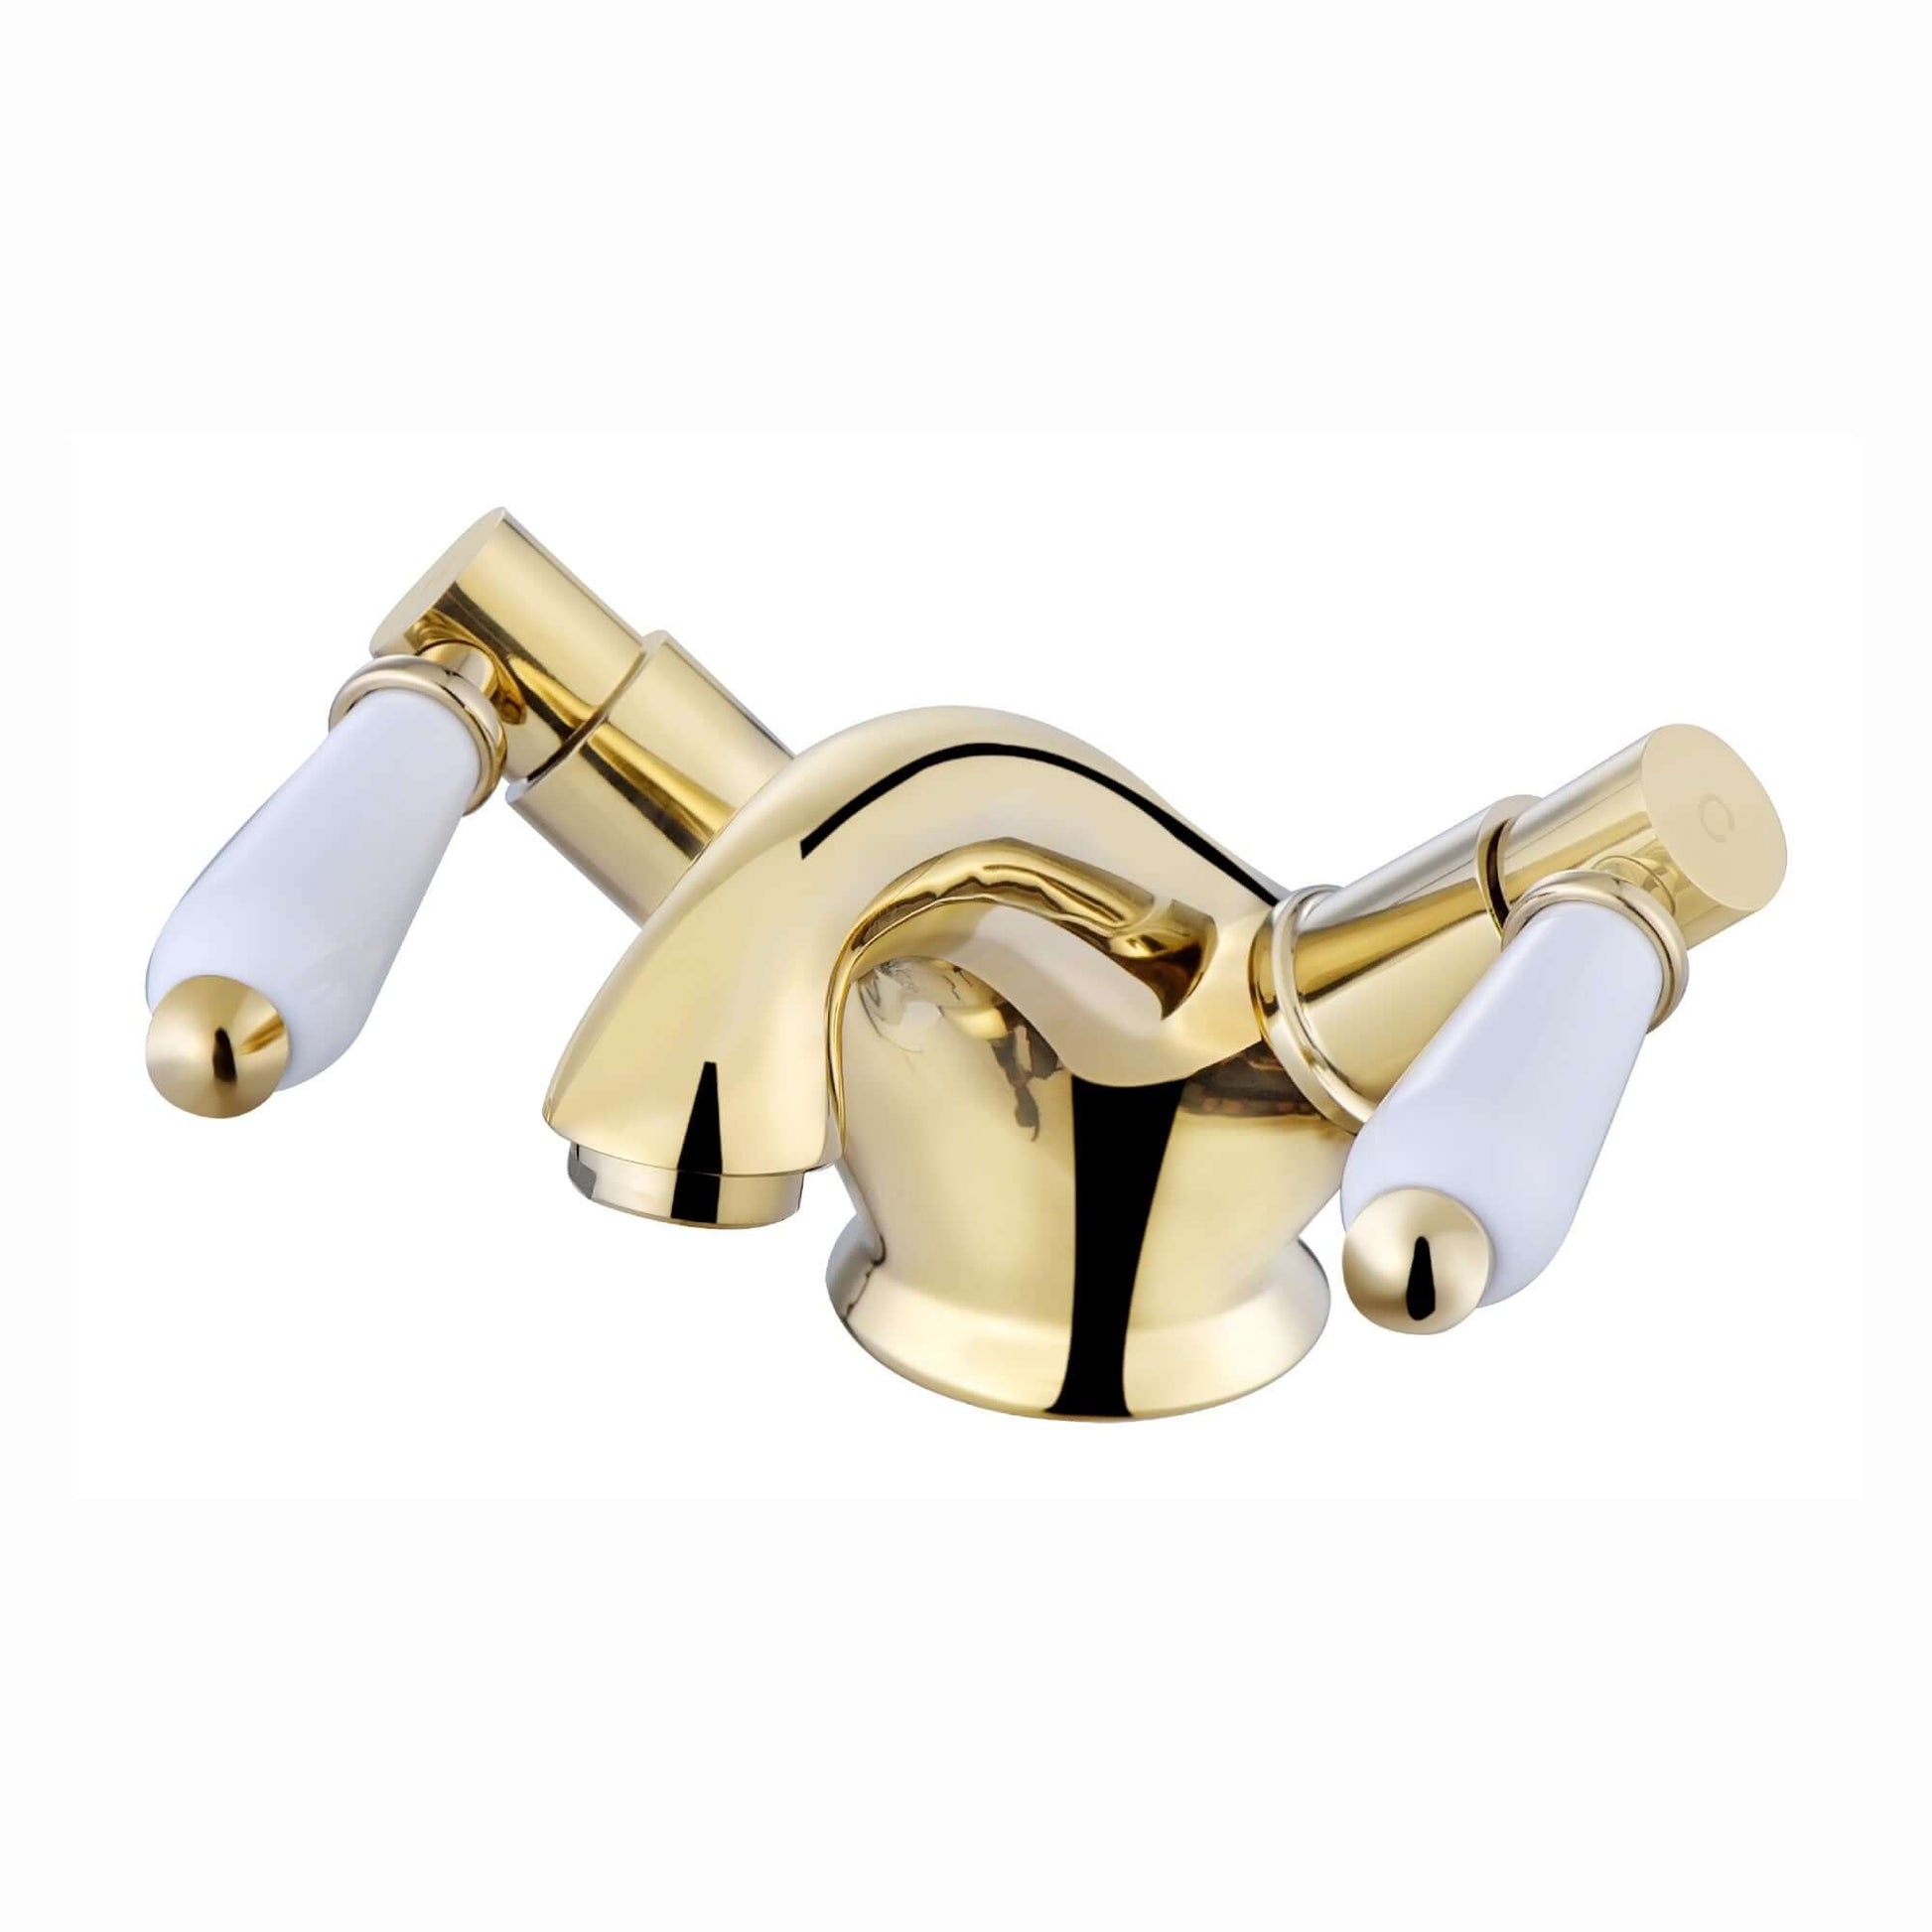 Downton basin mixer tap with white ceramic levers + slotted waste - English gold - Taps